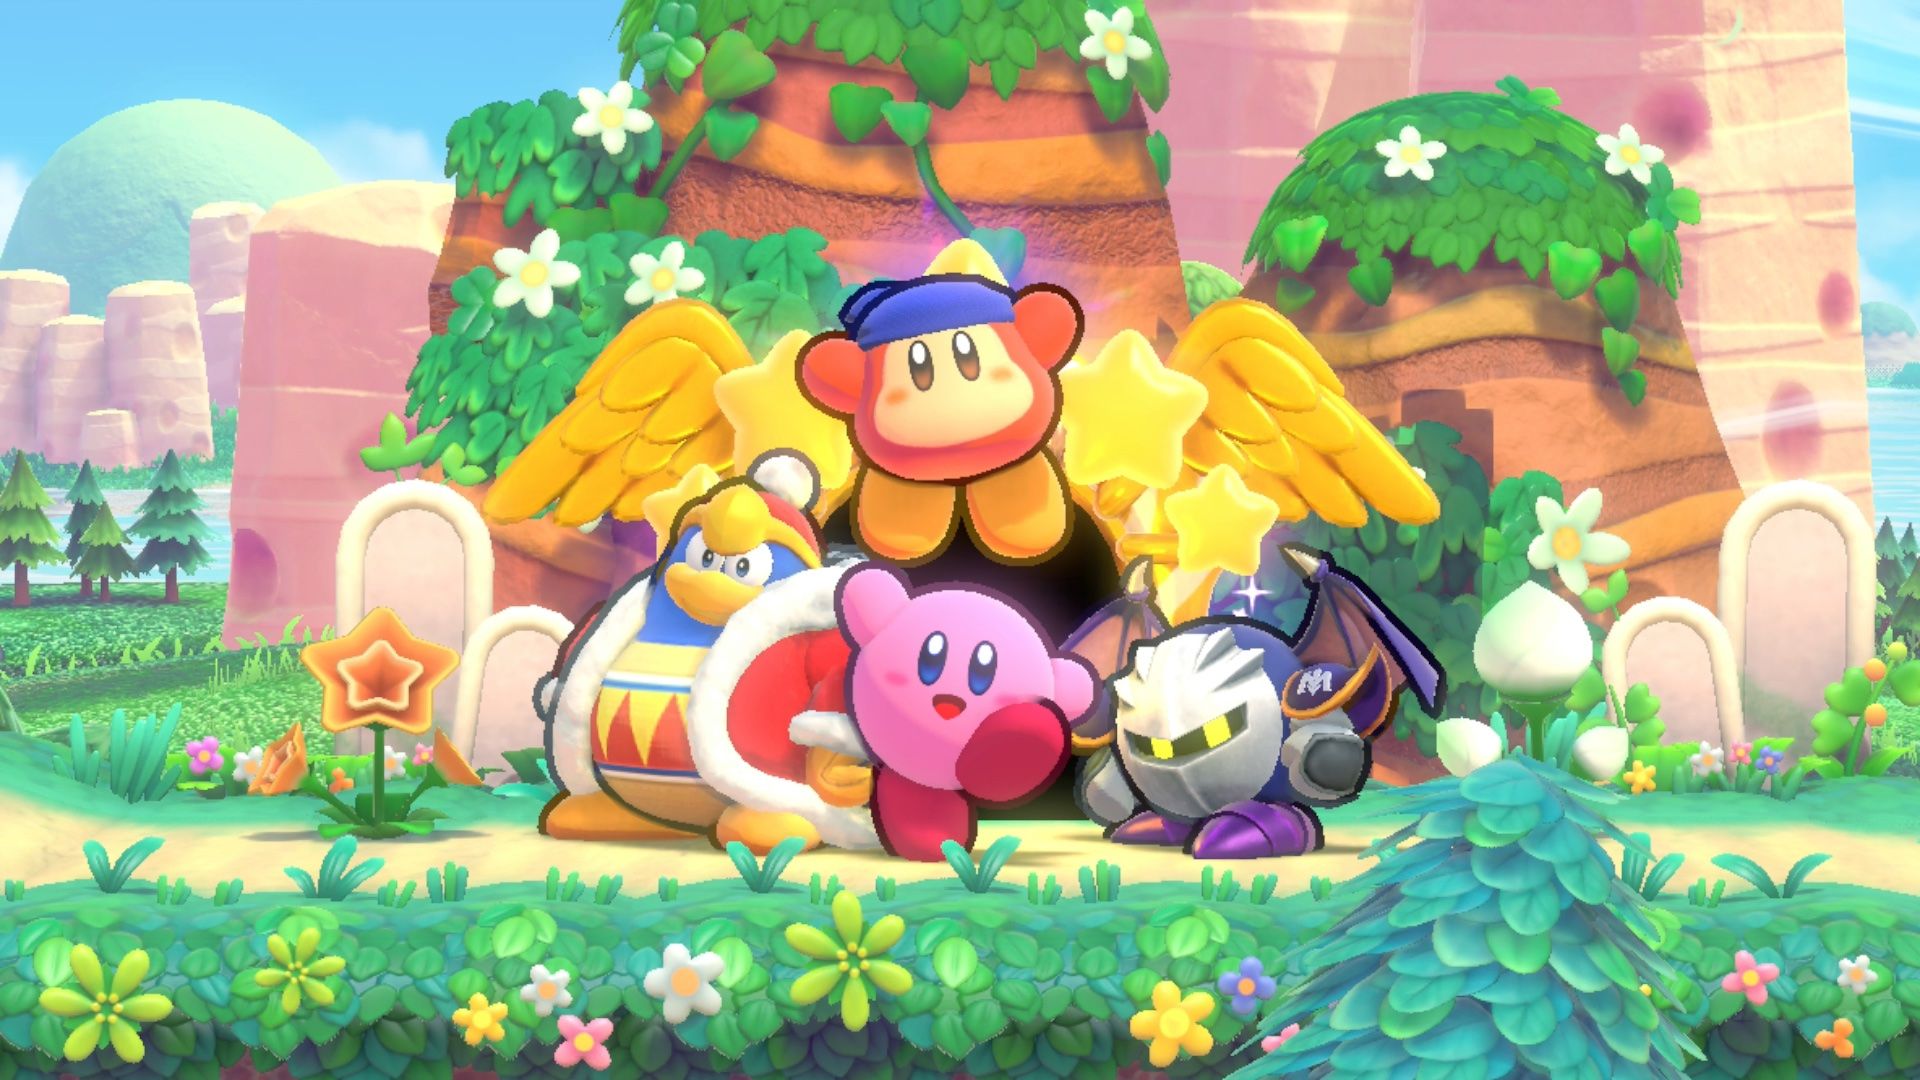 kirbys return to dream land deluxe switch